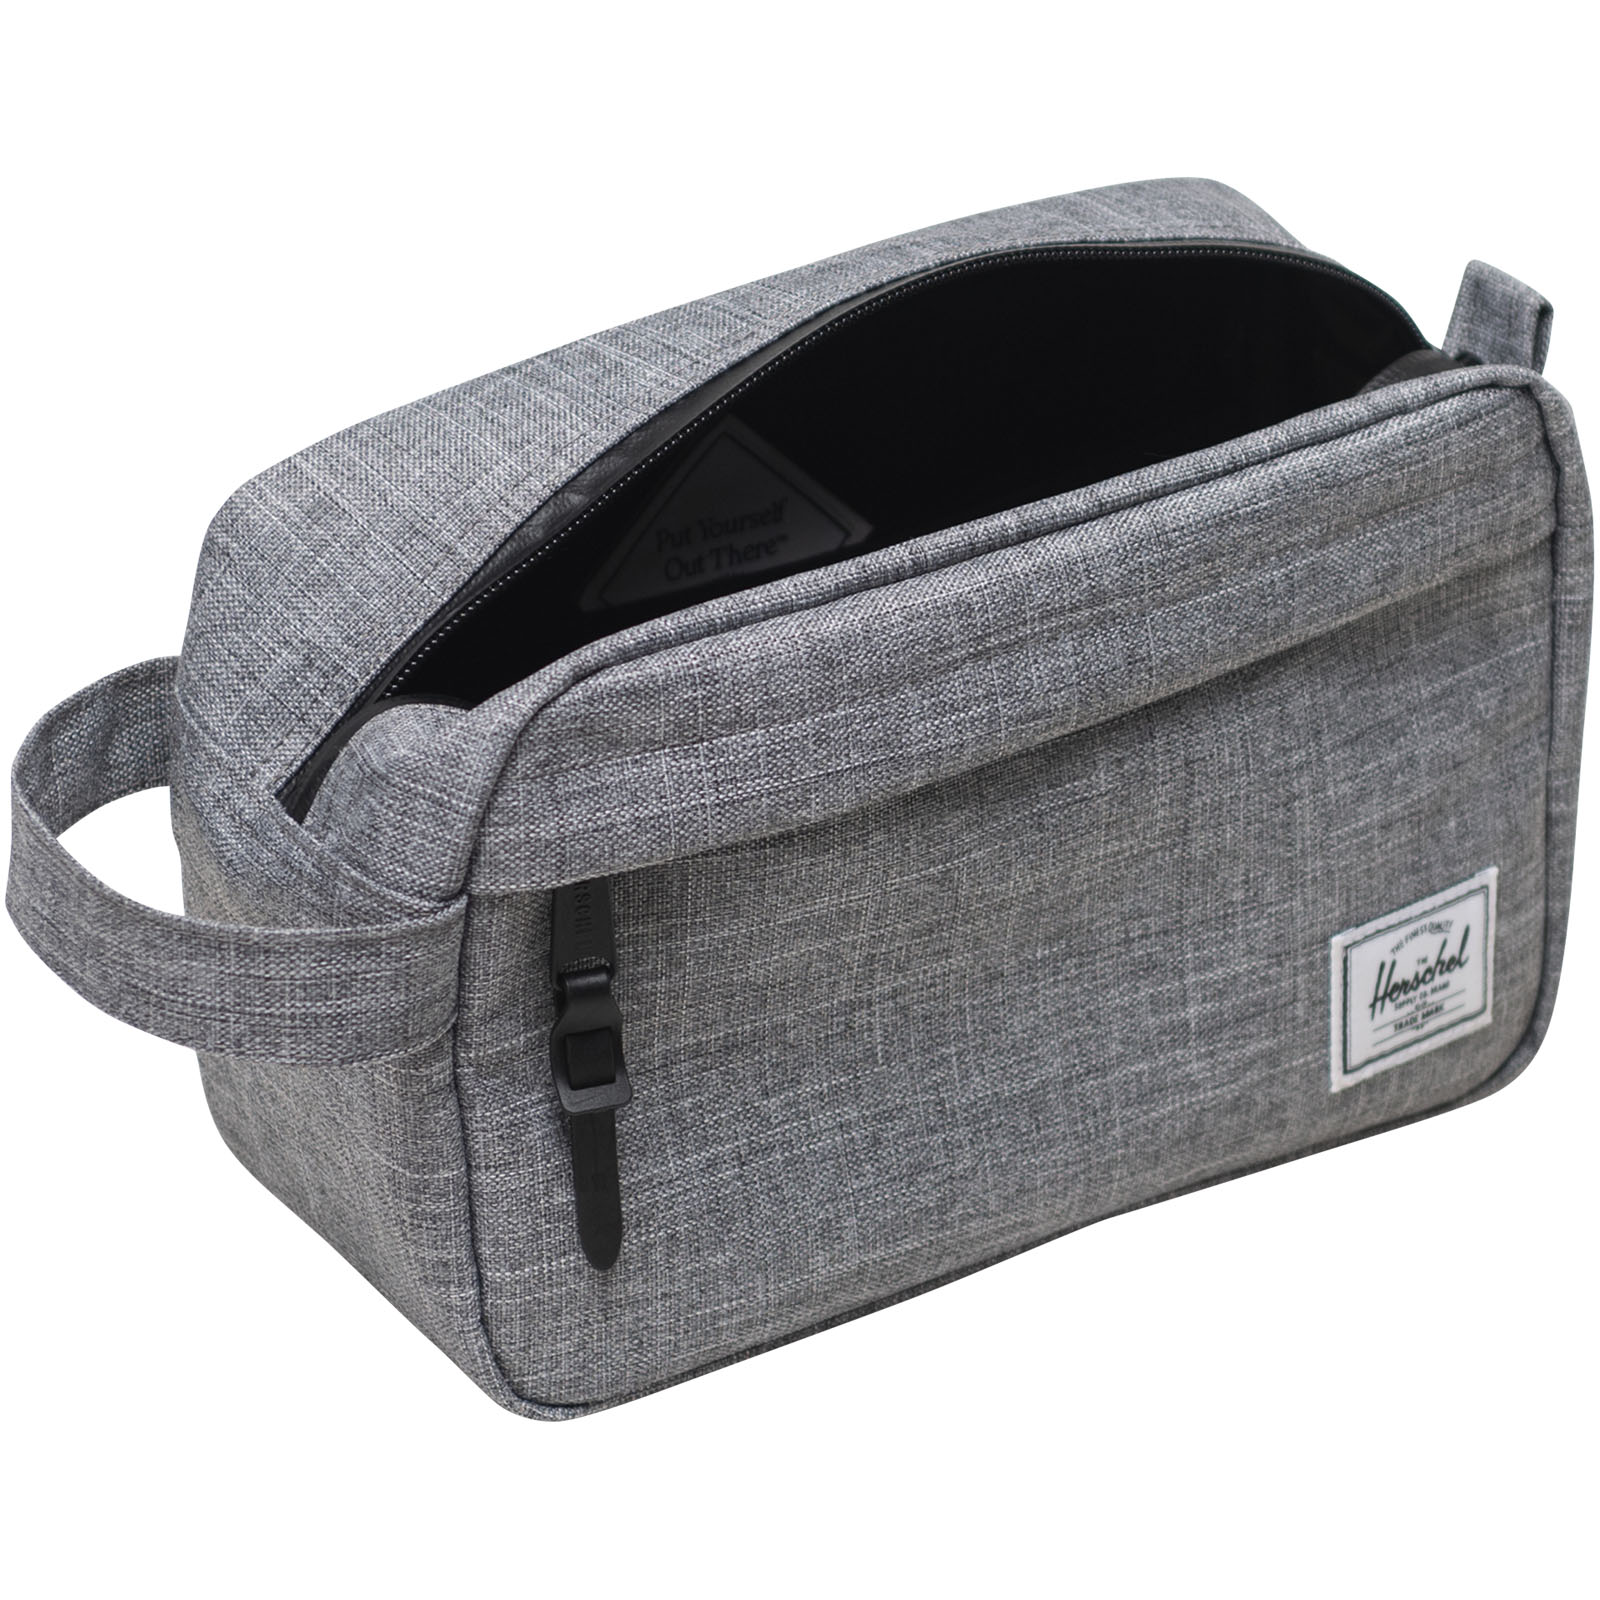 Advertising Toiletry Bags - Herschel Chapter recycled travel kit - 2